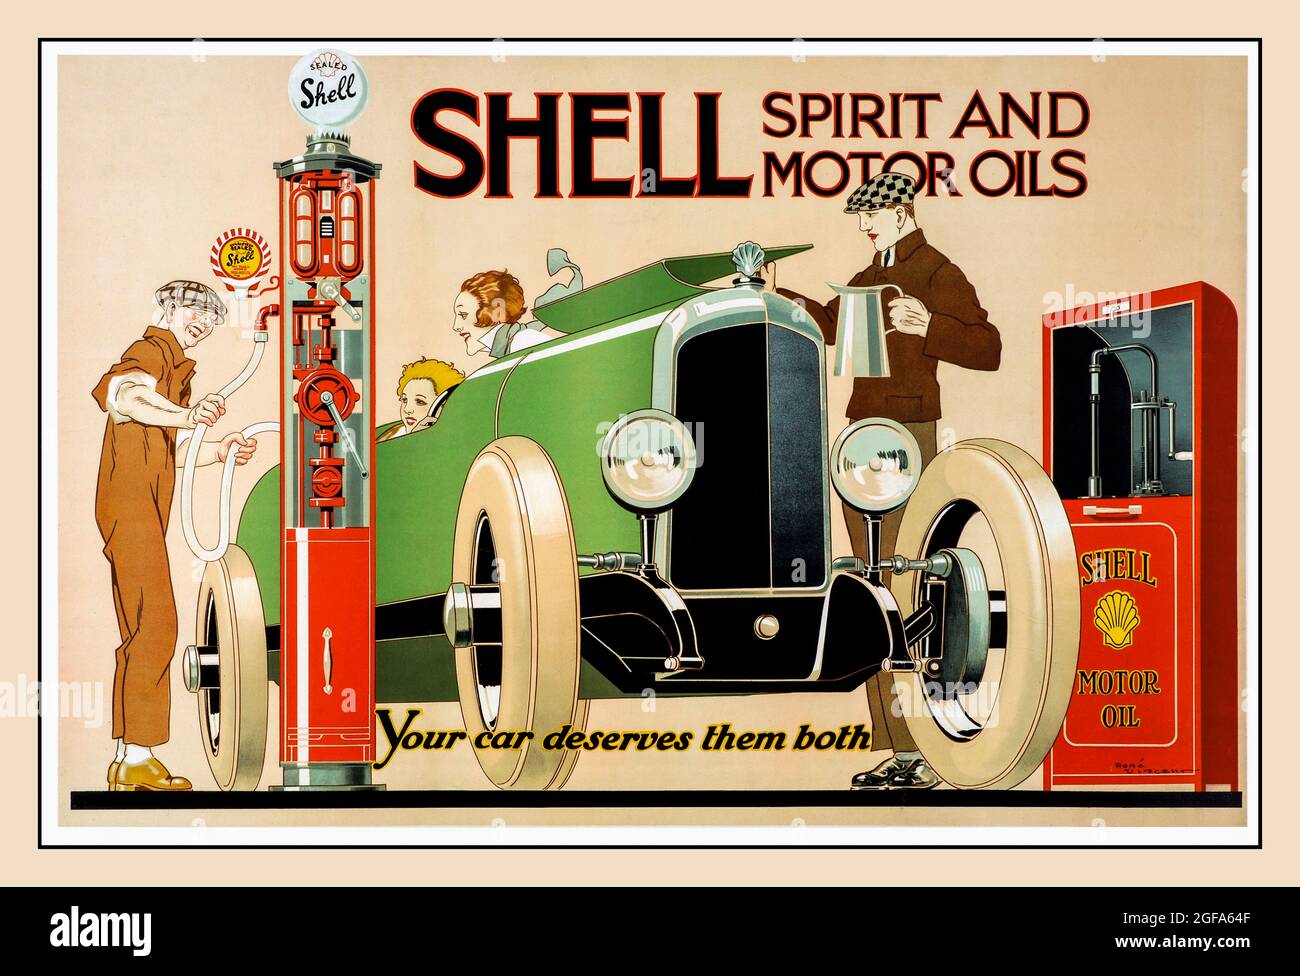 SHELL Vintage 1926 Shell Spirit and Motor Oils Poster, 'Your car redients them both' Art Deco Poster Lithograph von Rene Vincent Stockfoto